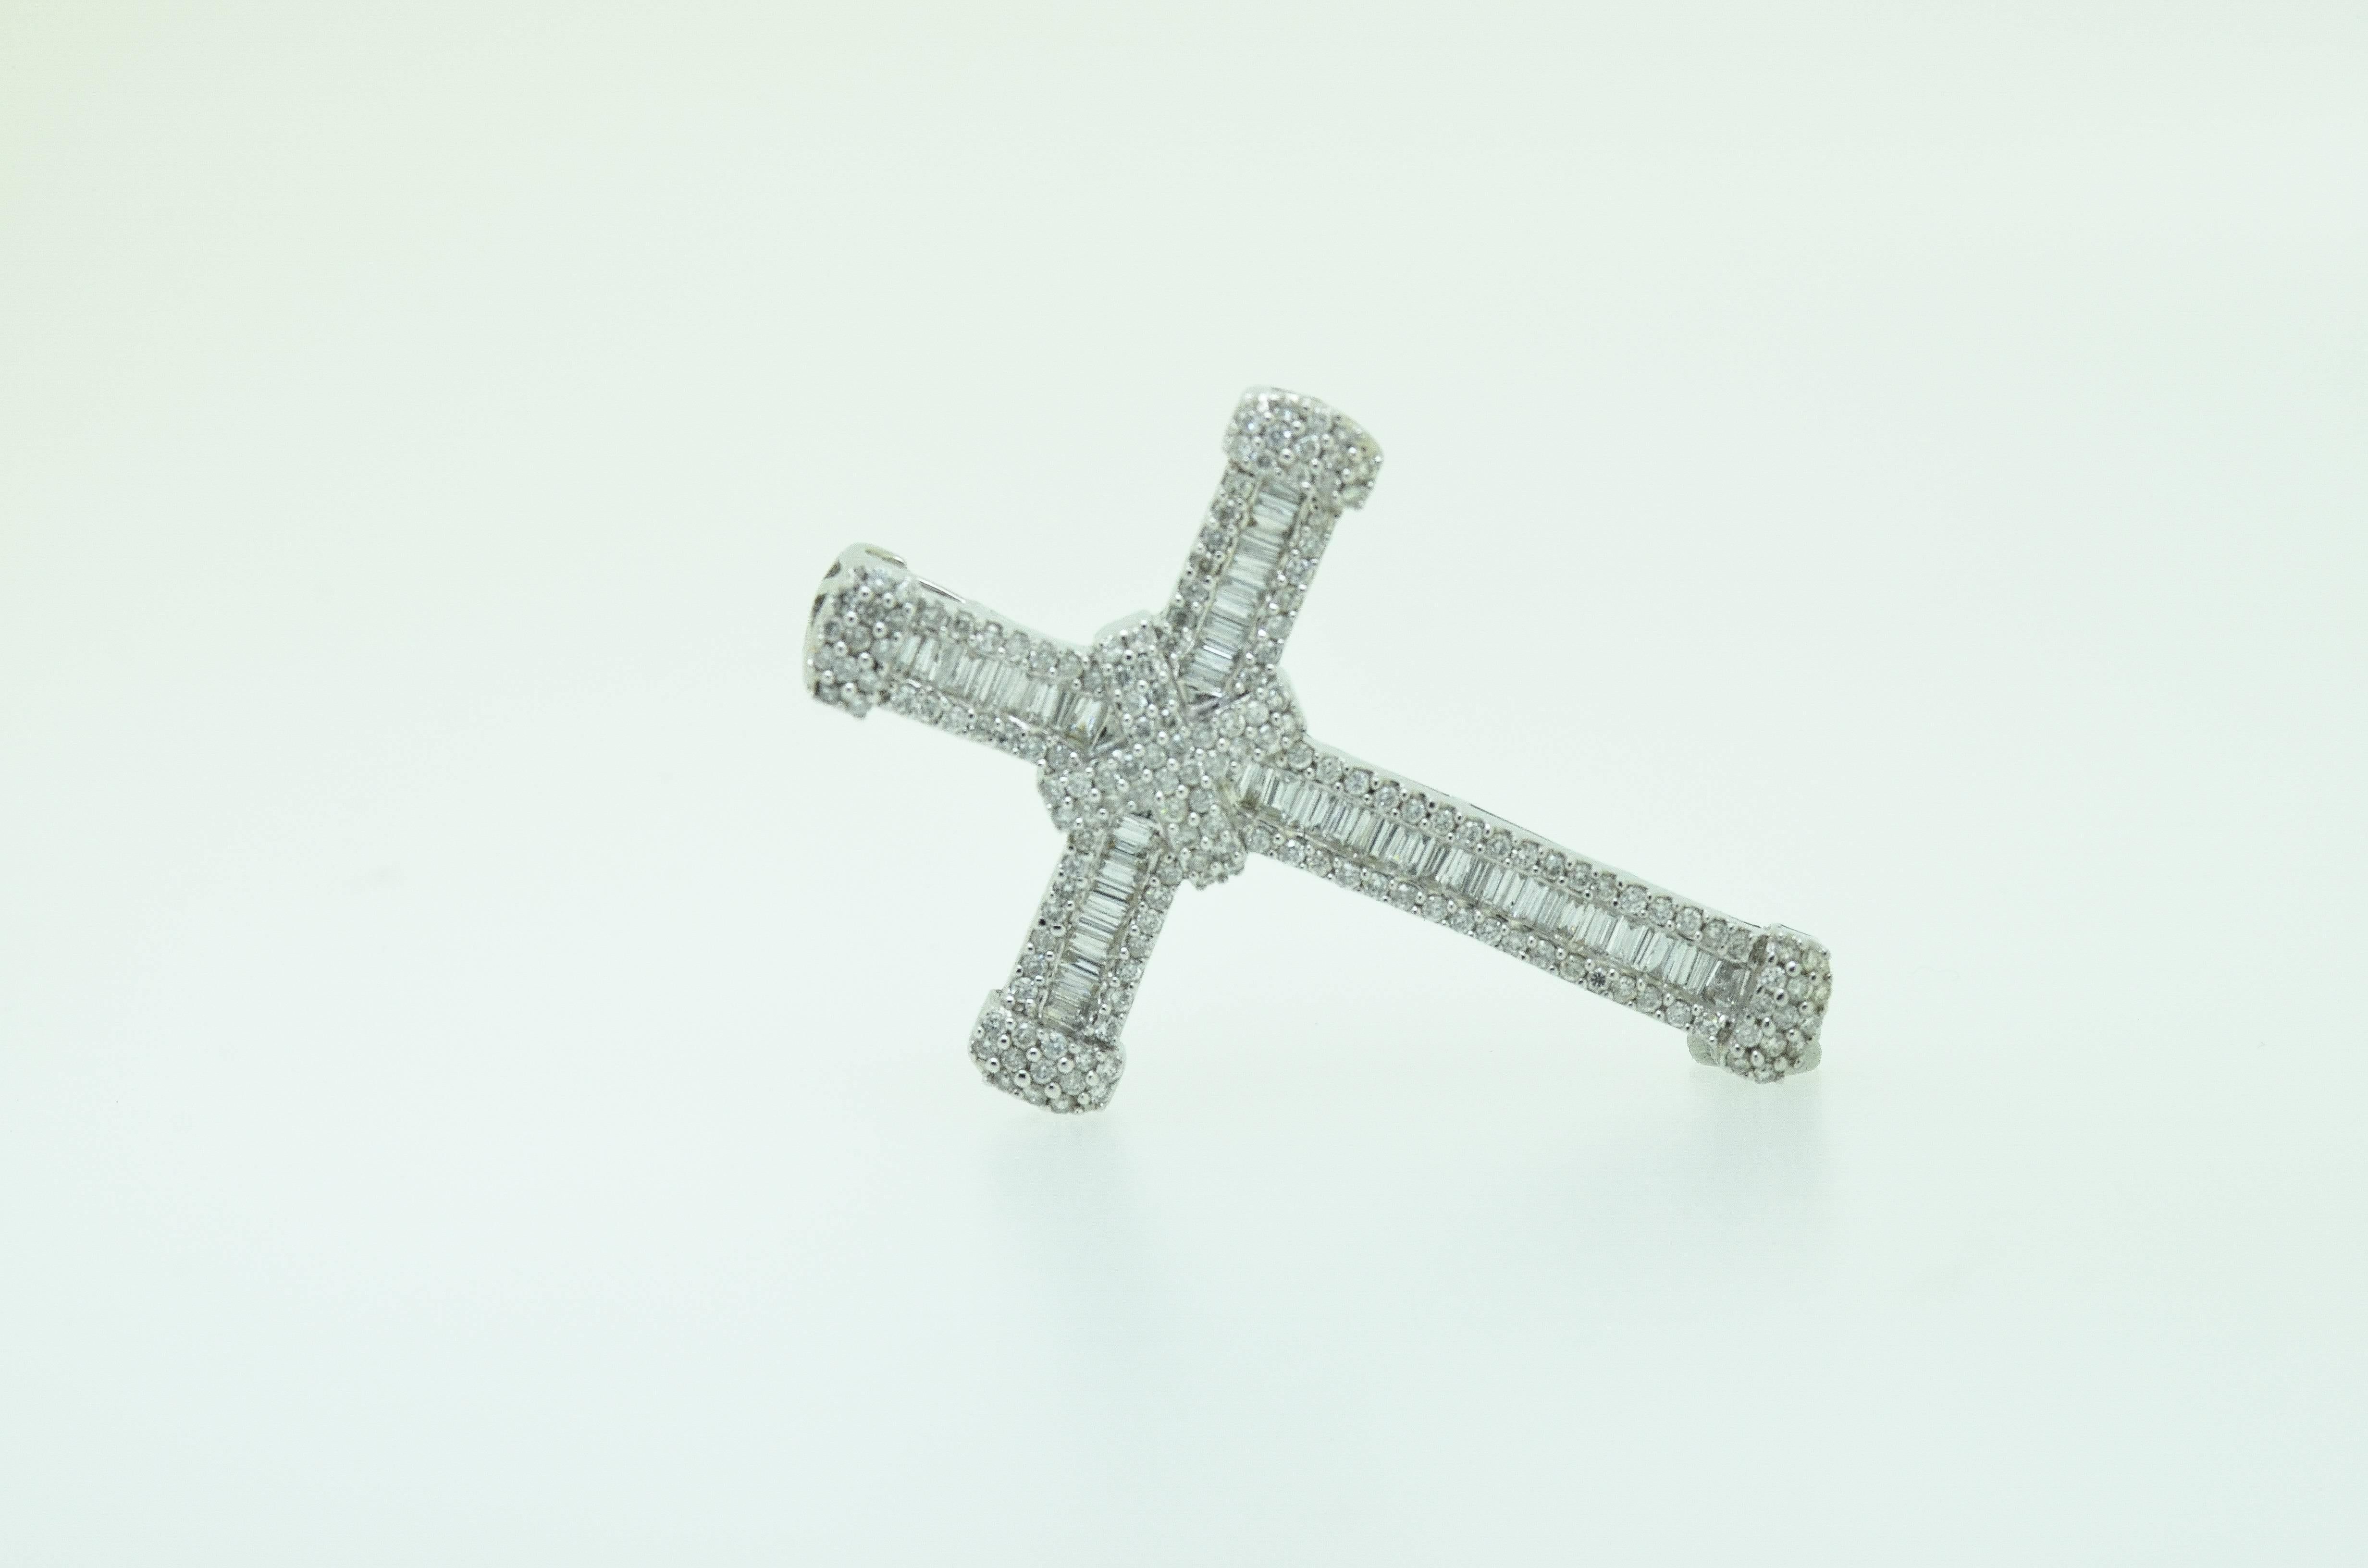 Stunning Tiffany style diamond cross set with over 4 carats of baguette and brilliant cut diamonds mounted in 18 karat white gold